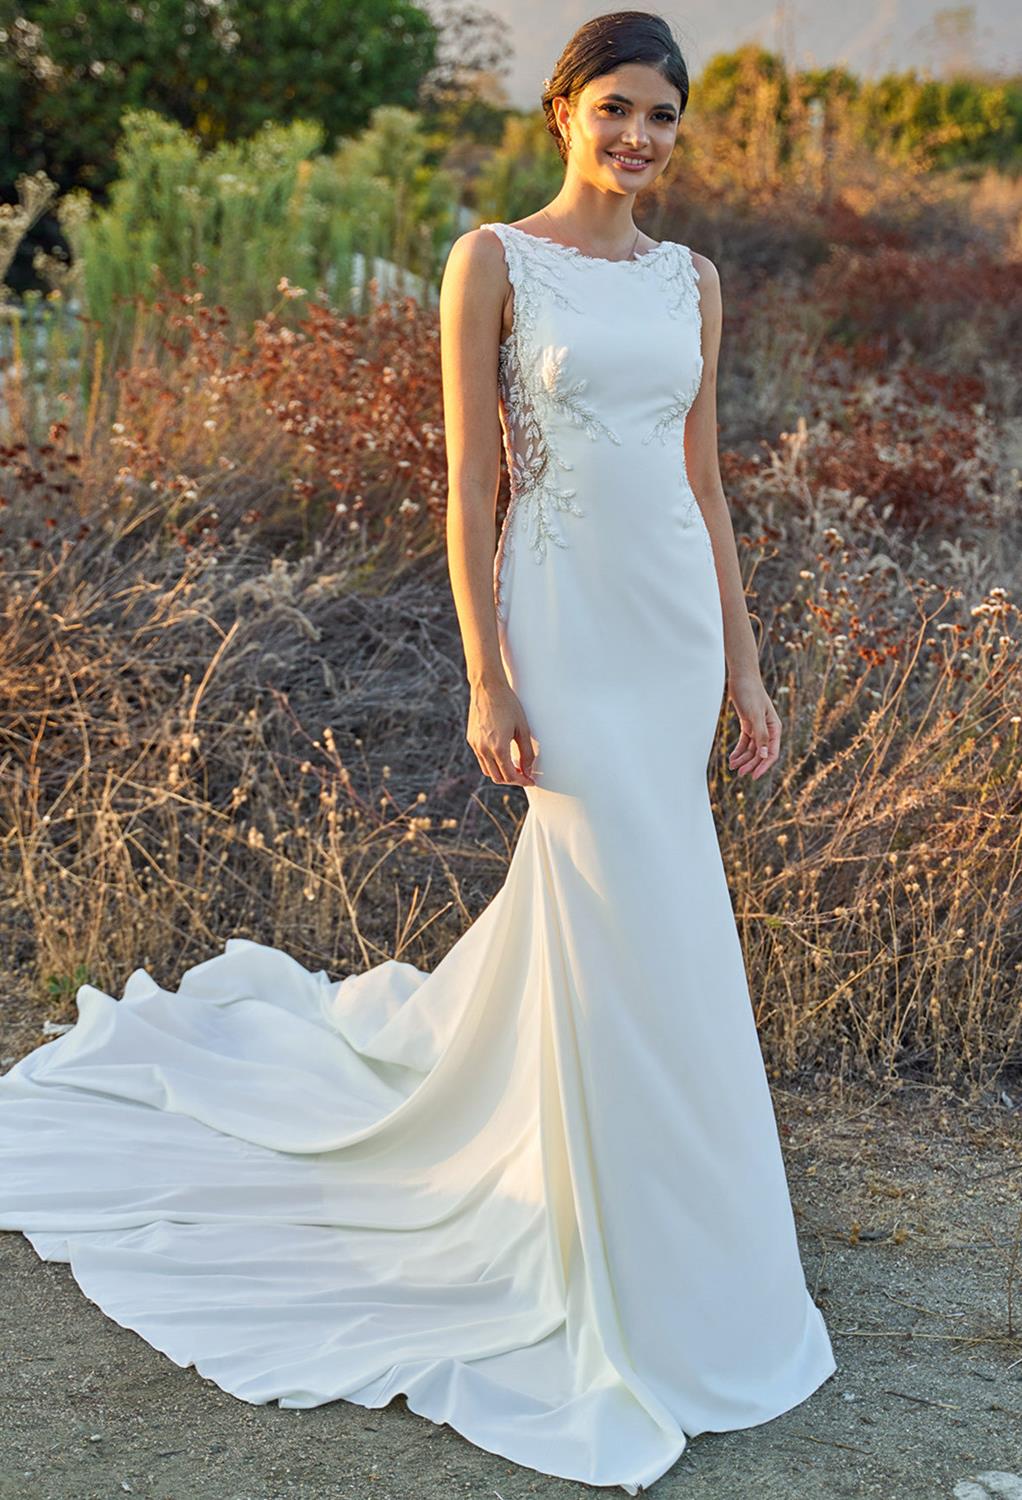 Lovely High-Neck Wedding Dress - Sheath with Back Button Detail